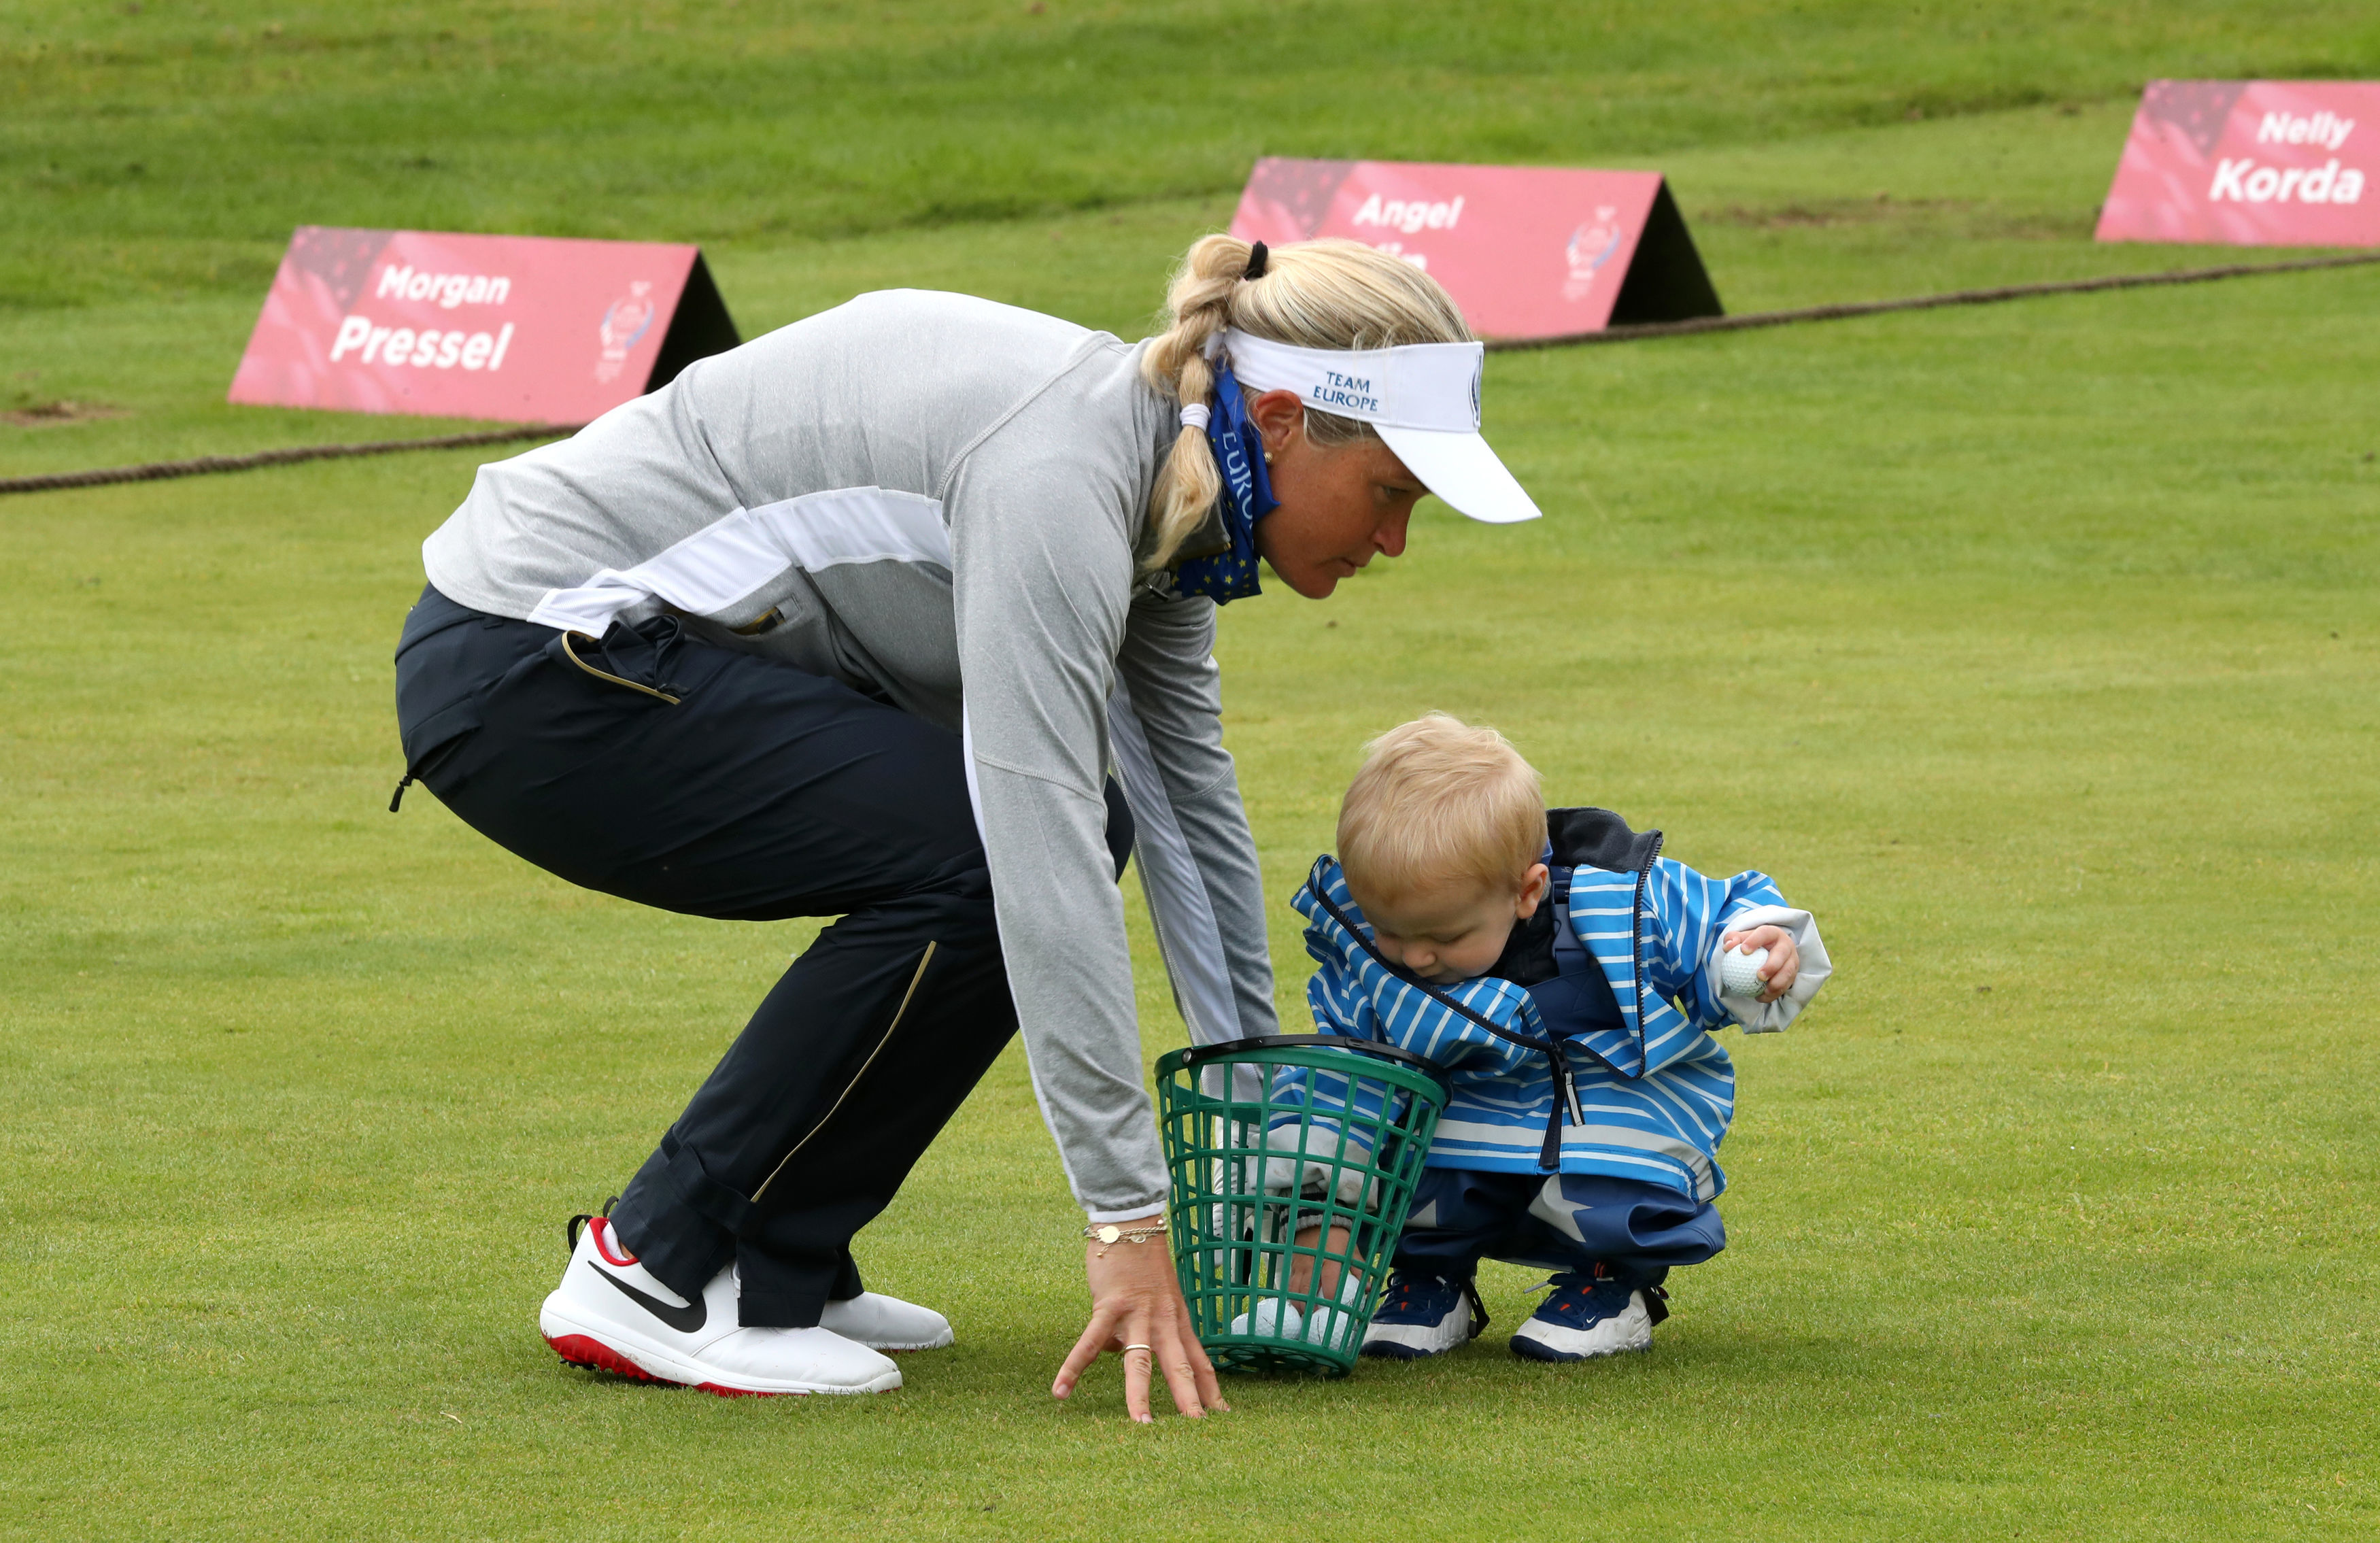 Suzann Pettersen with her son Herman on the driving range at Gleneagles.